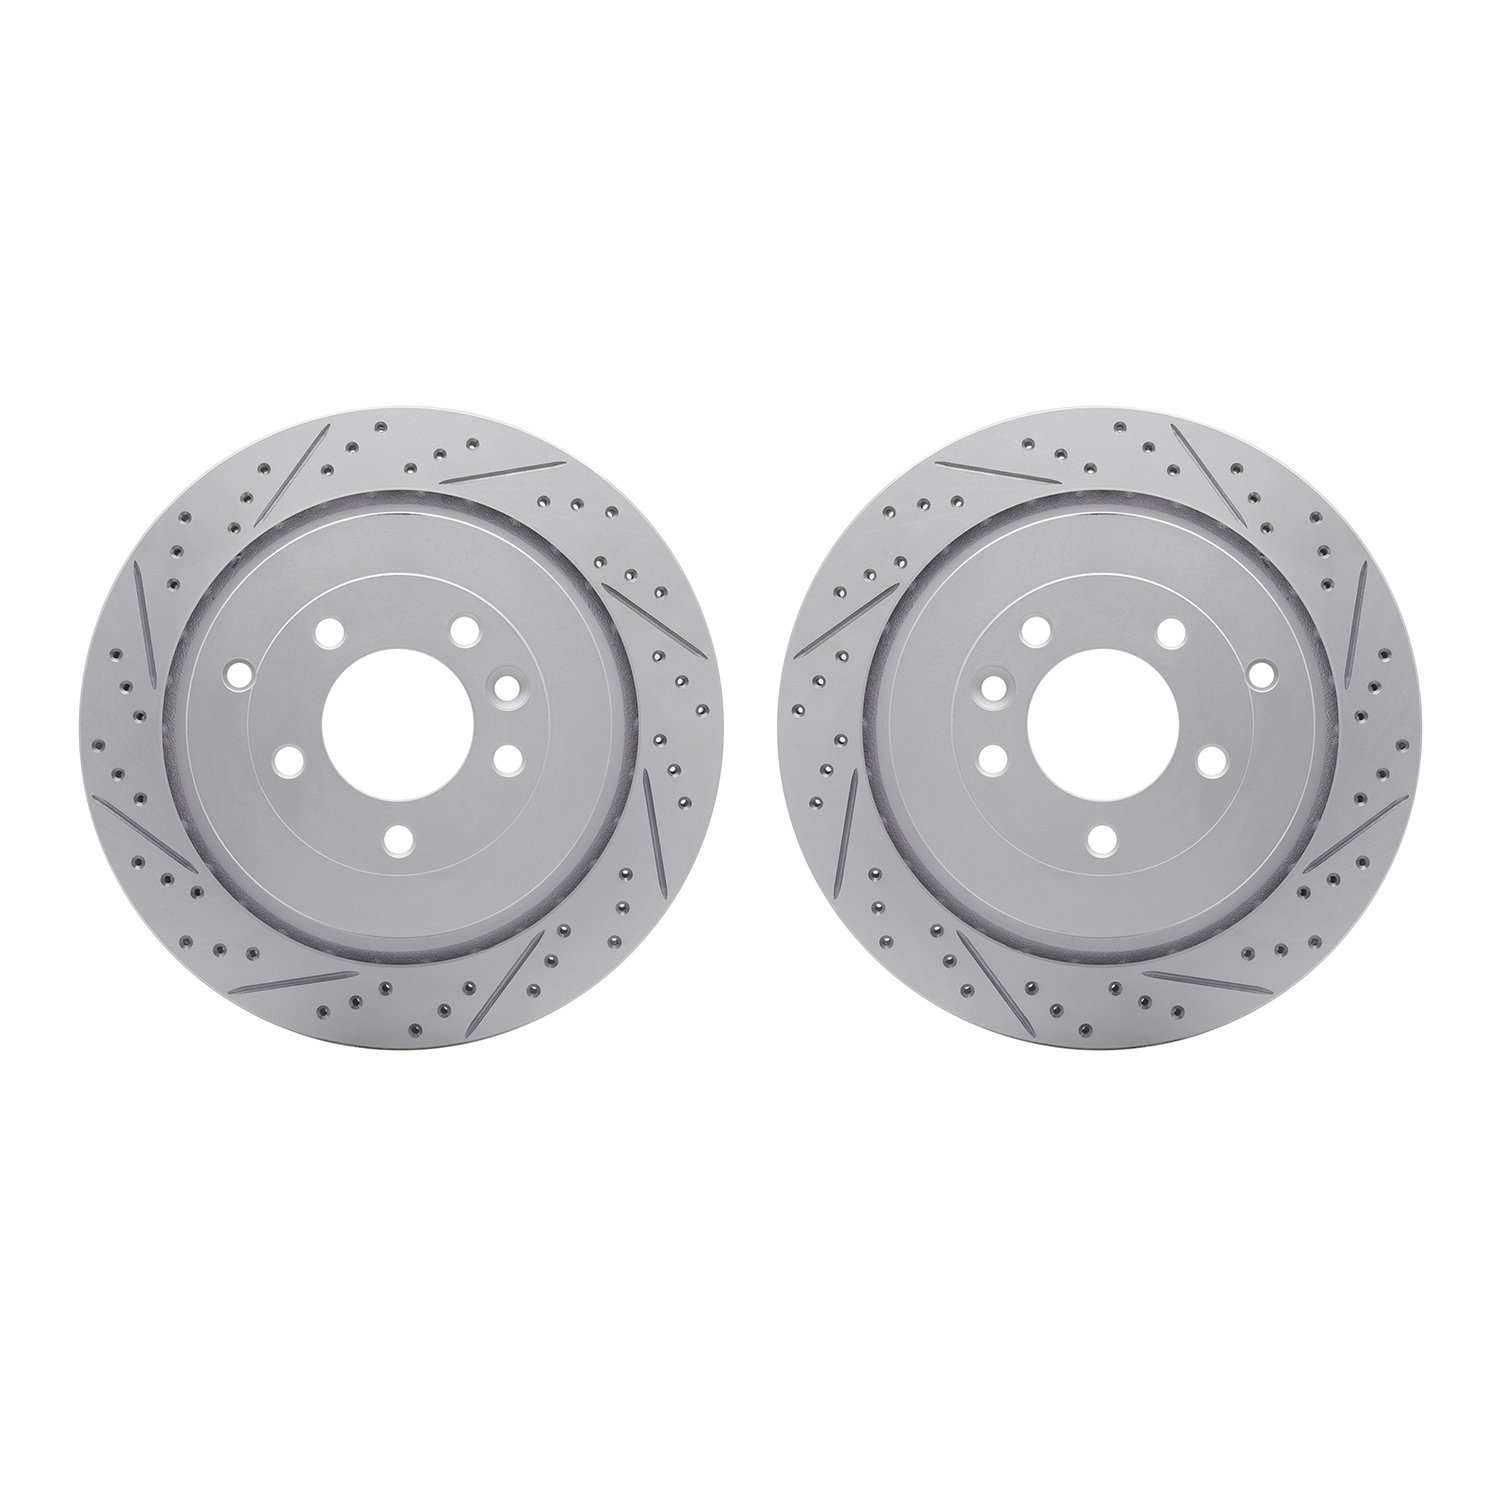 2002-11026 Geoperformance Drilled/Slotted Brake Rotors, 2005-2016 Land Rover, Position: Rear